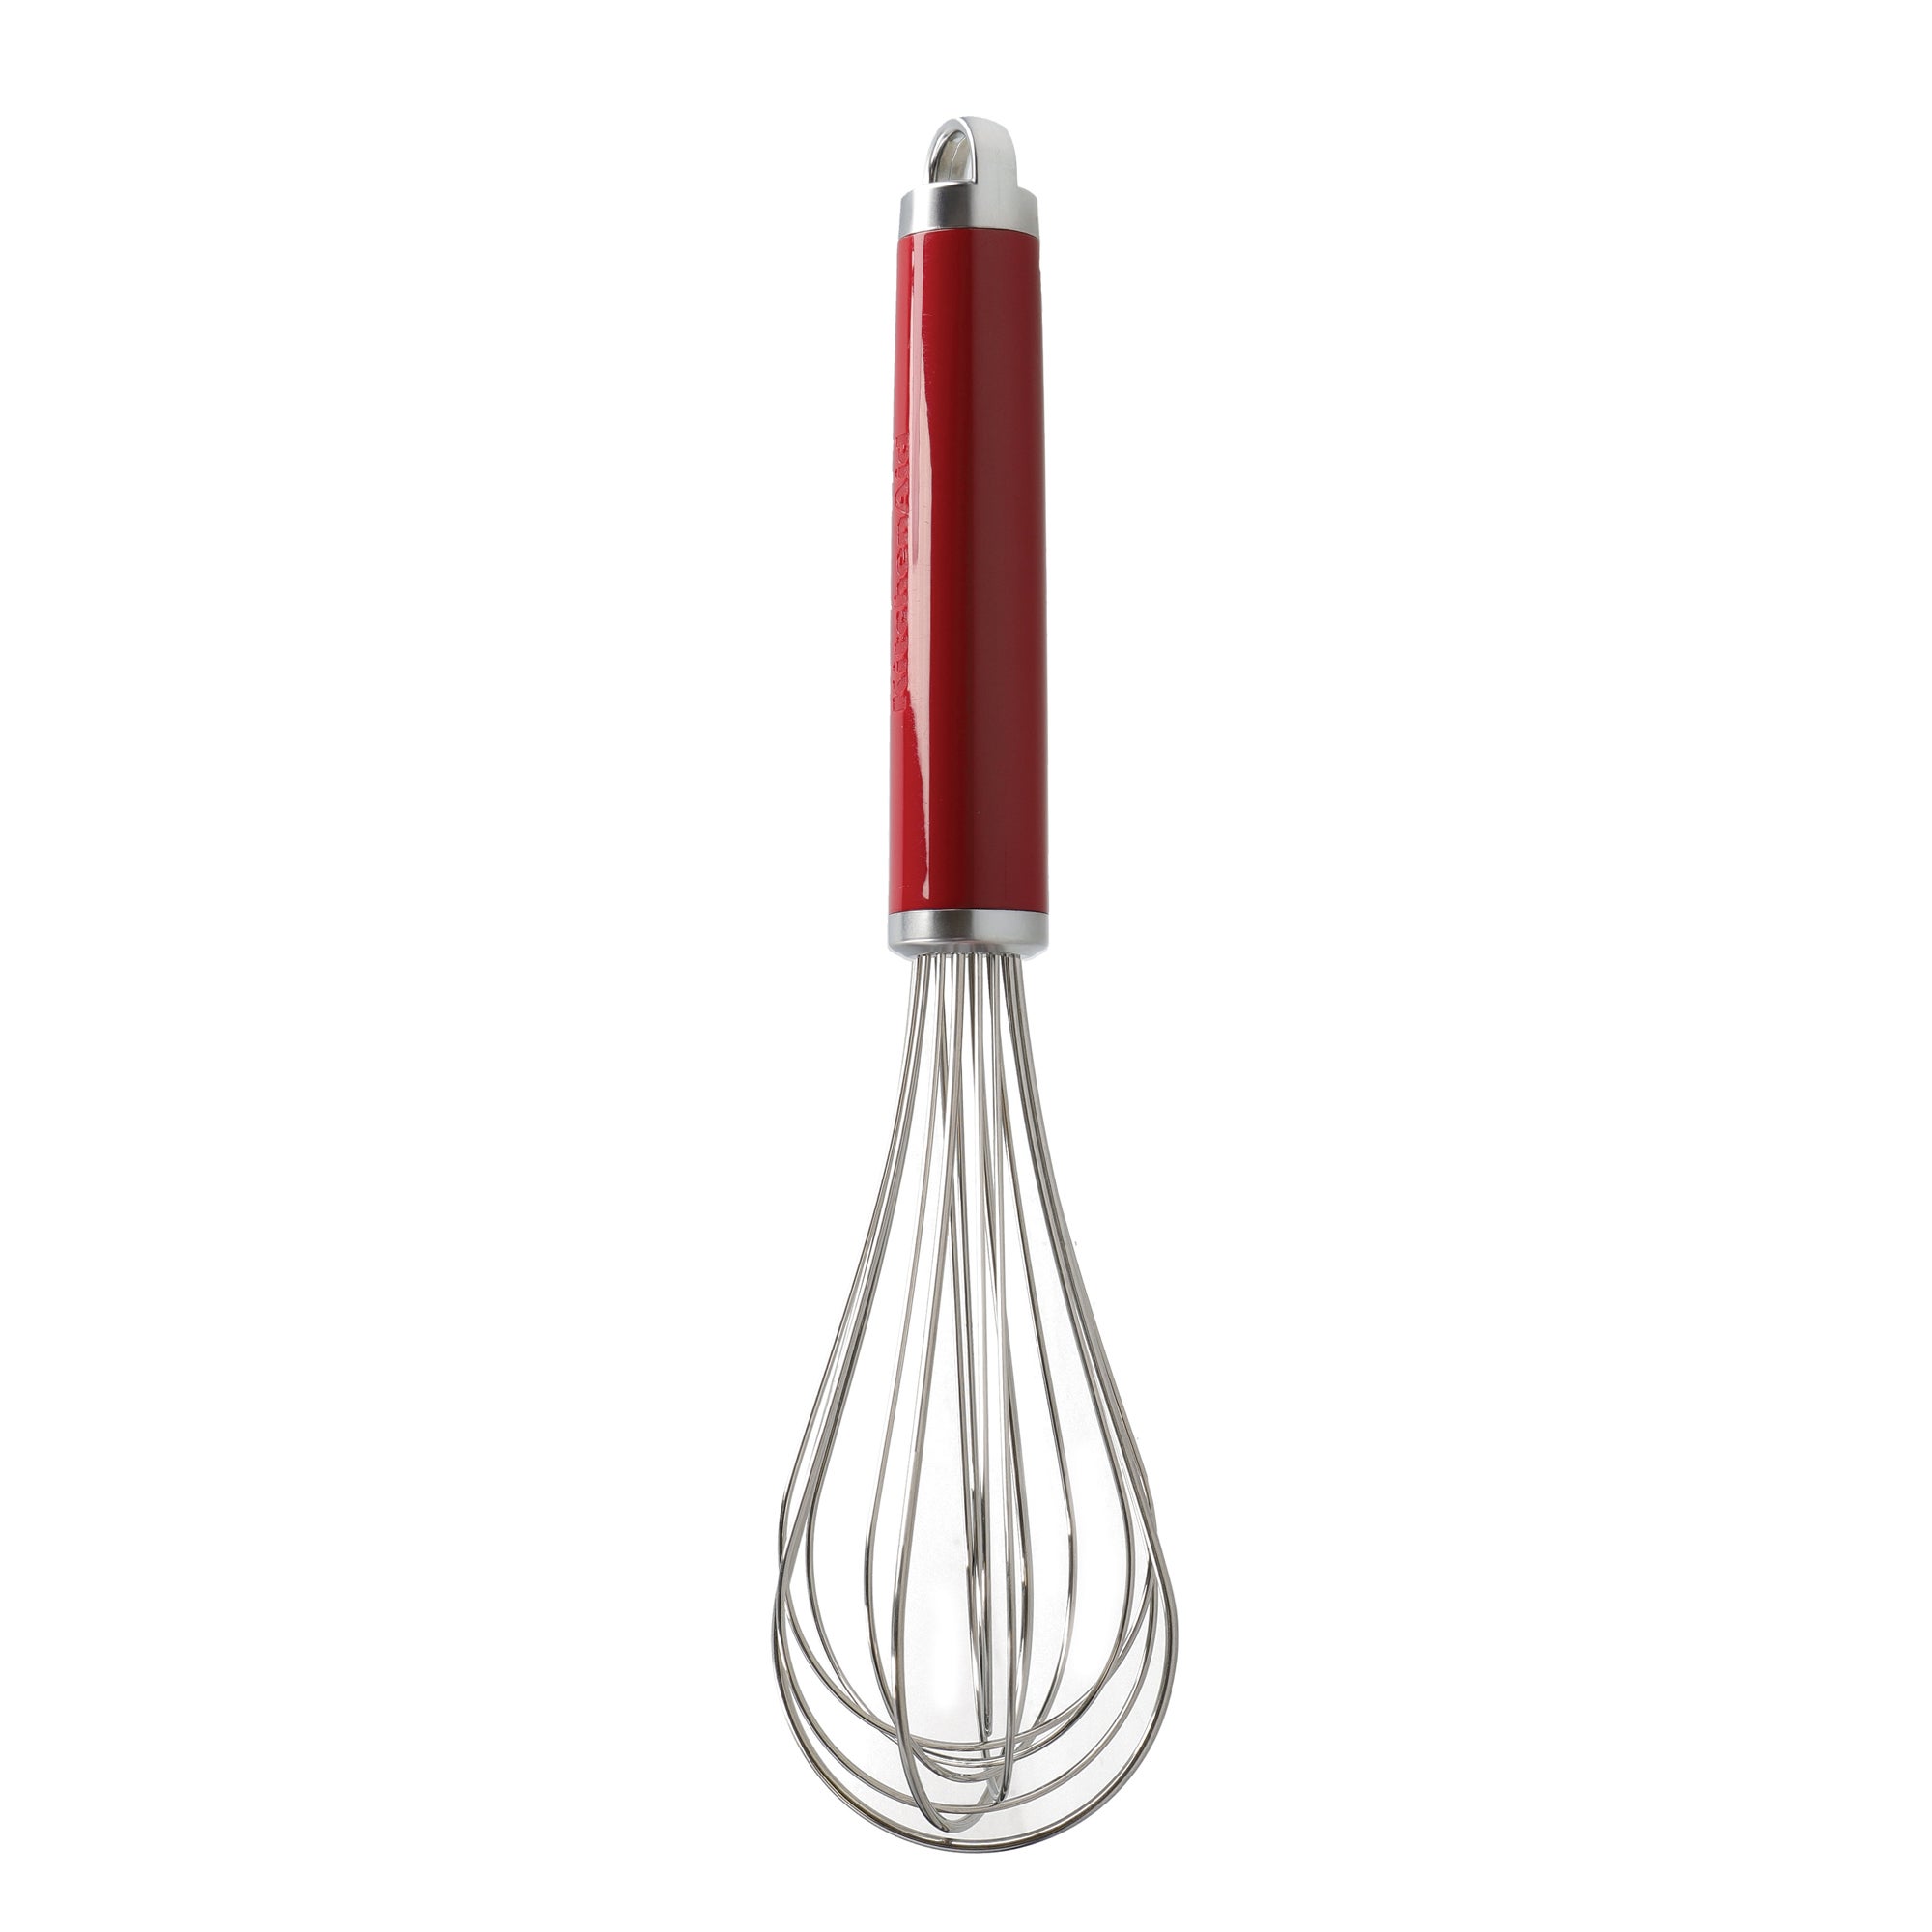 KitchenAid Stainless Steel Manual Hand Whisk